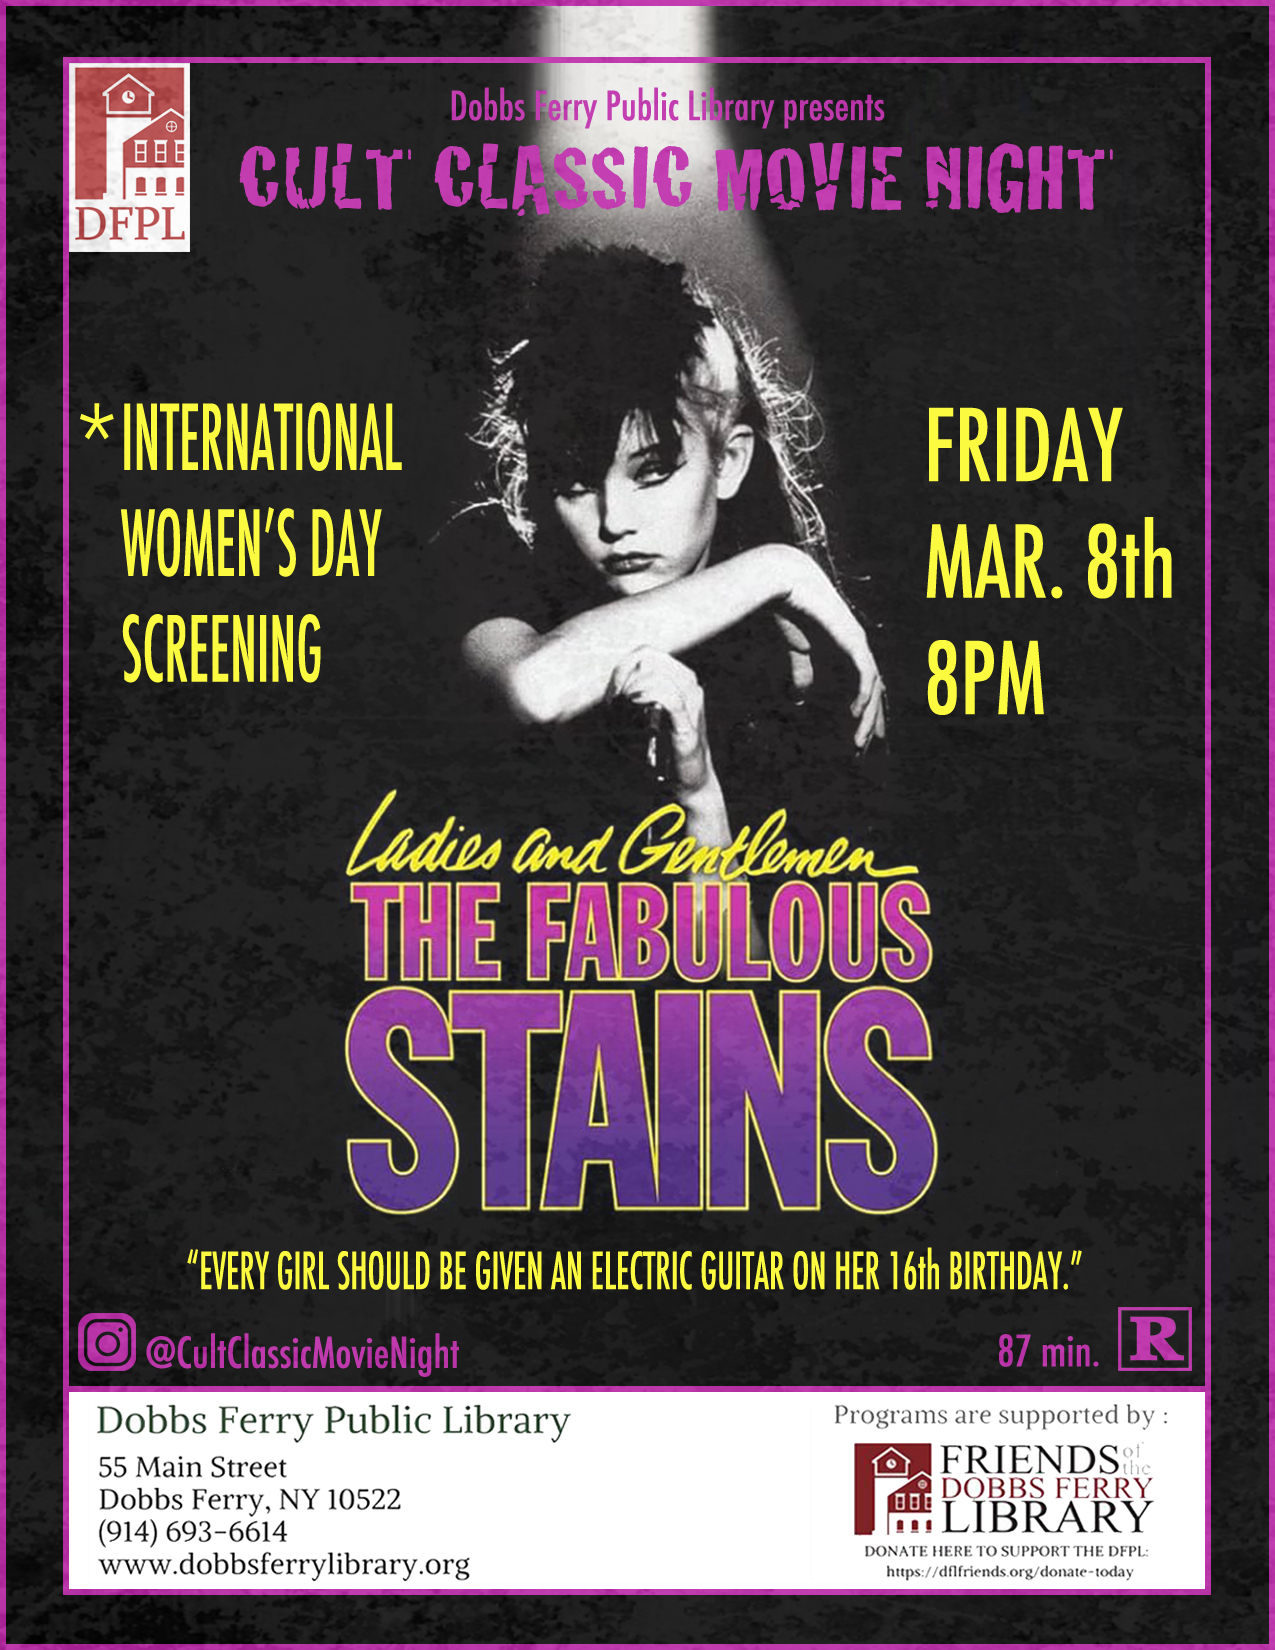 Cult Classic Movie Night International Women's Day Screening: Ladies and Gentlemen, The Fabulous Stains (1982/Rated R/Musical, Thriller/97 min)